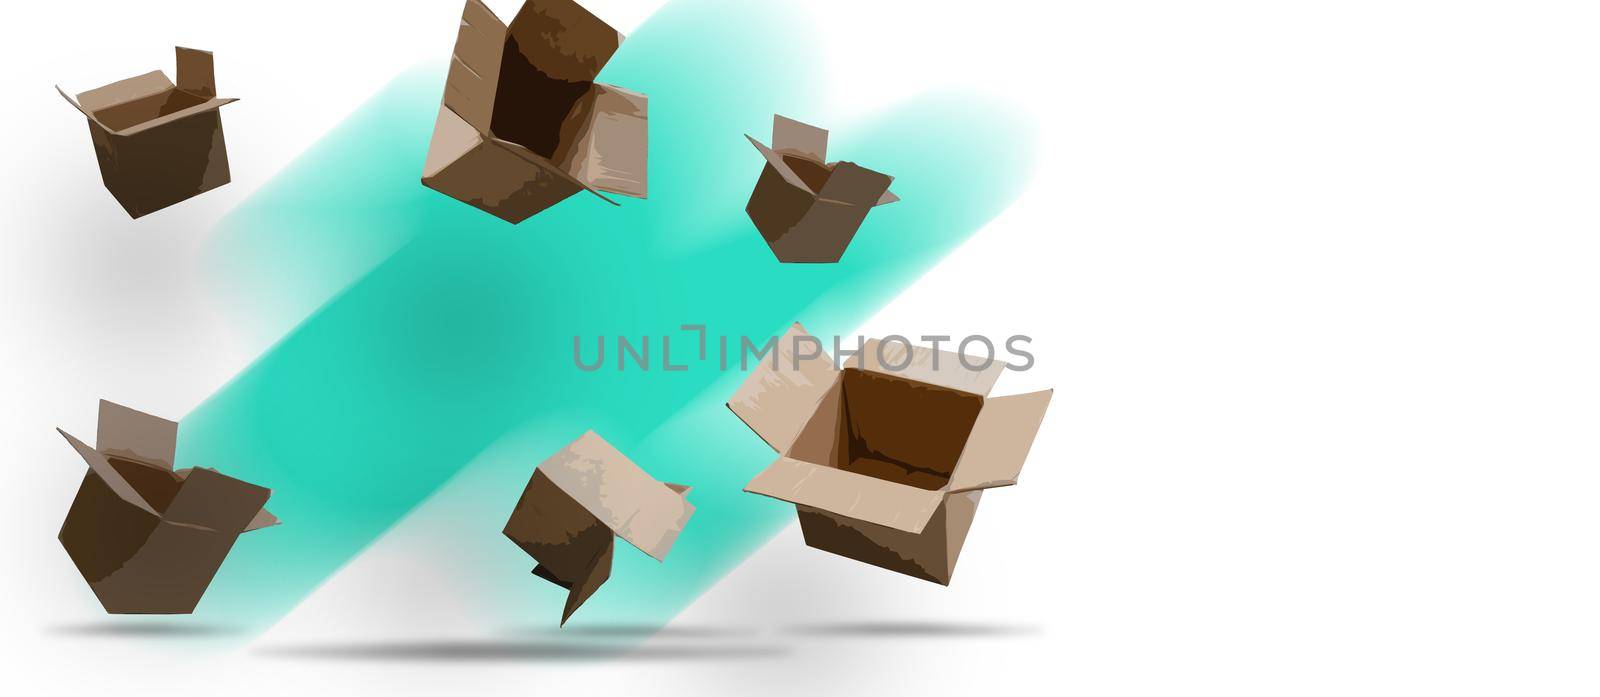 Ilustration of a set of different cardboard boxes